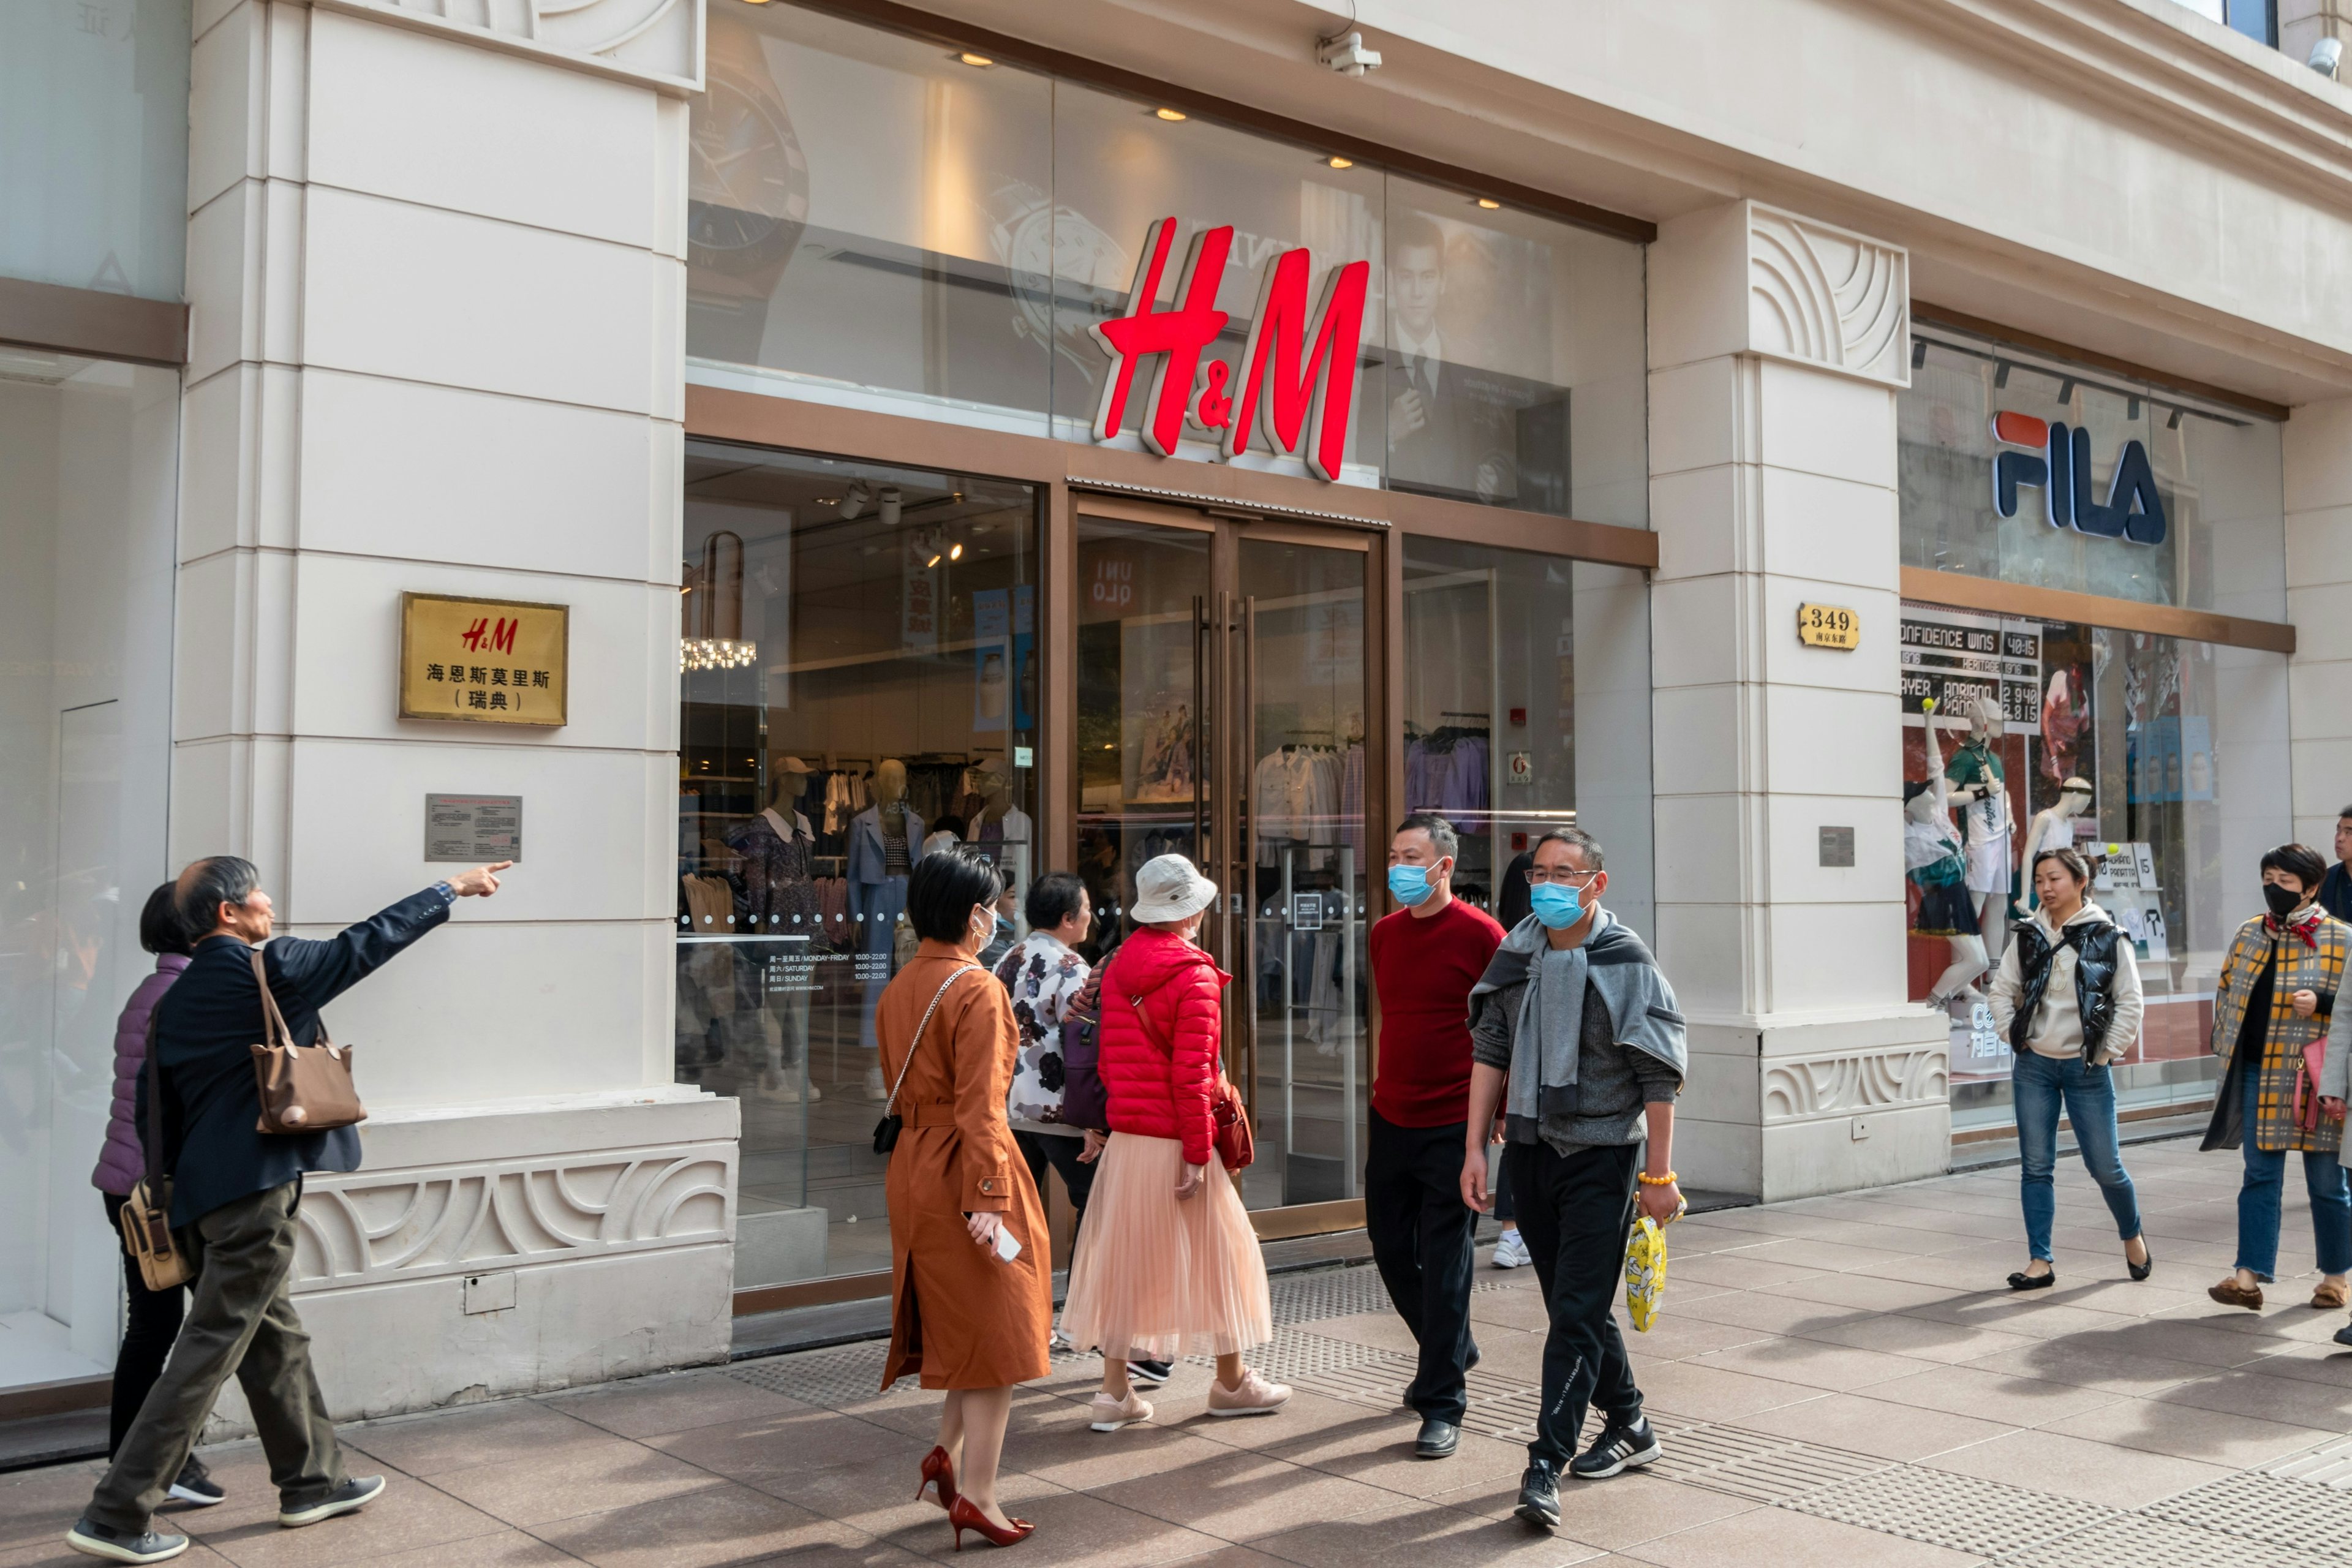 Citizens walk past an H&M store on Nanjing Road pedestrian street in Shanghai, China, March 24, 2021. Photo: Costfoto/Future Publishing via Getty Images